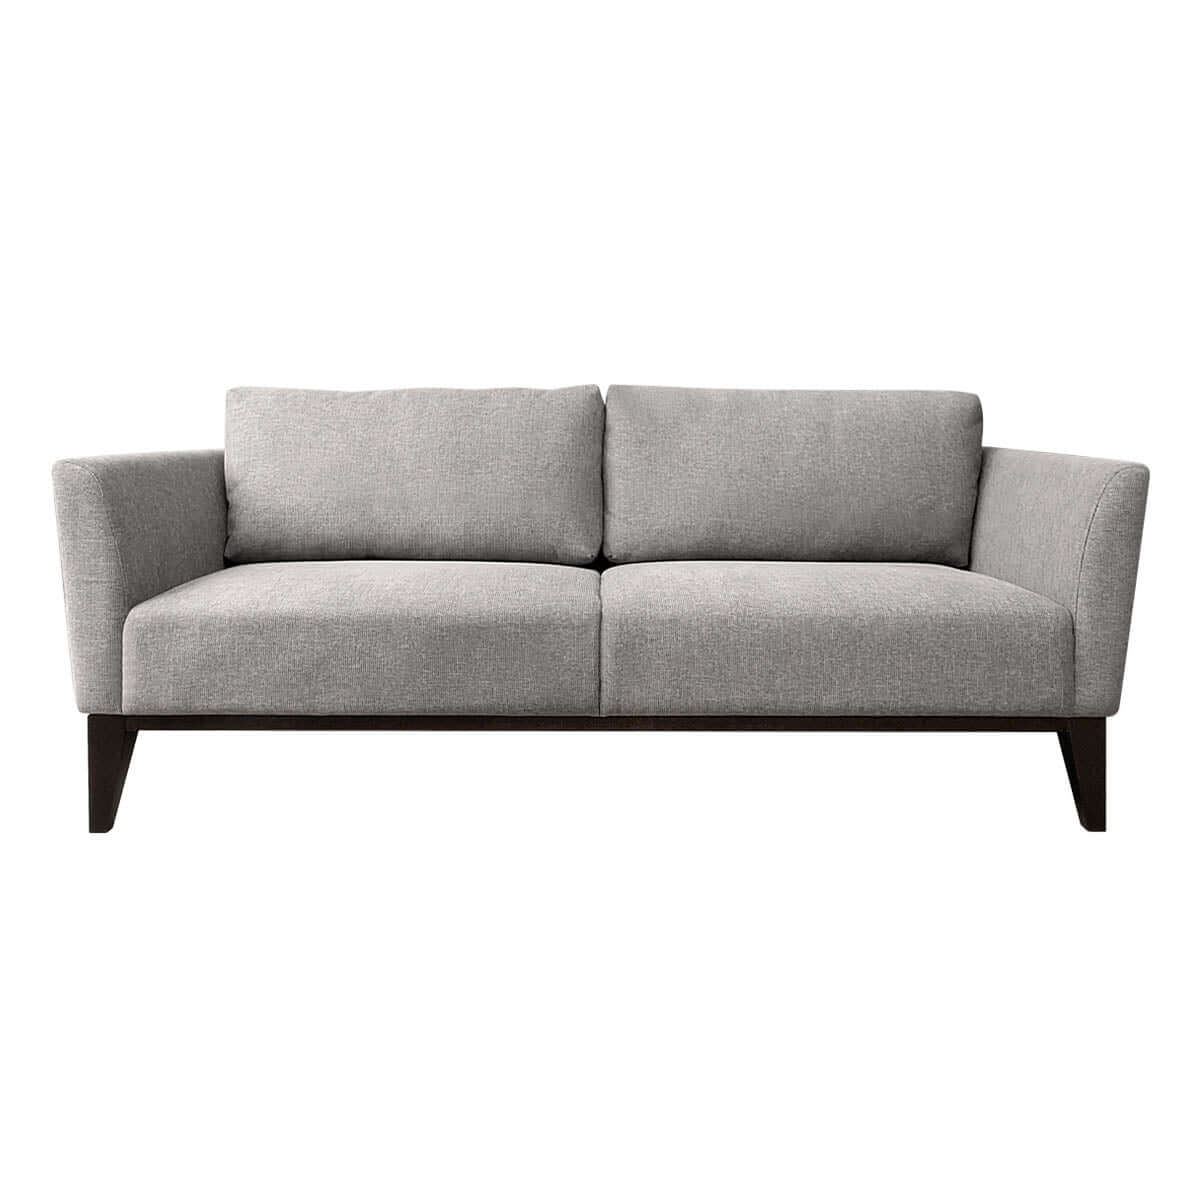 Soho 3-seat sofa, our new and contemporary collection 